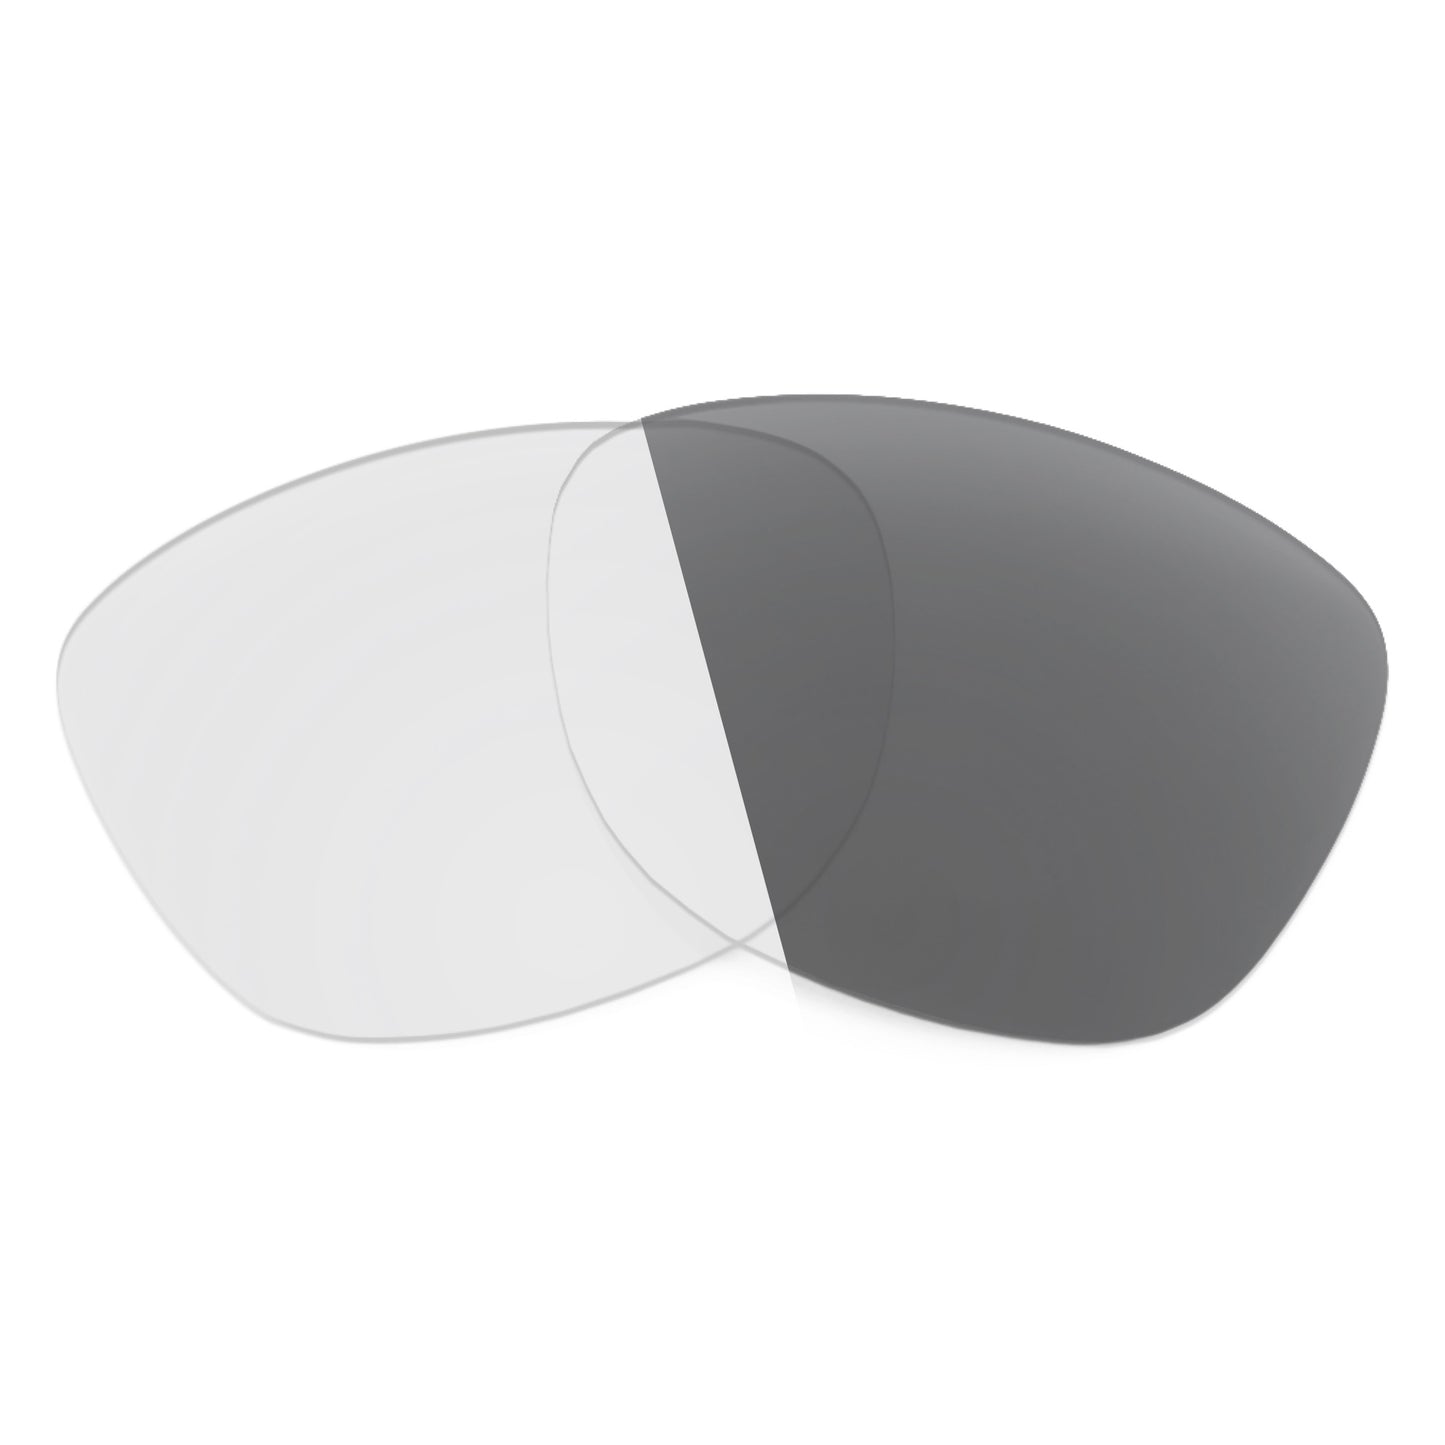 Revant replacement lenses for Ray-Ban RB4061 55mm Non-Polarized Adapt Gray Photochromic